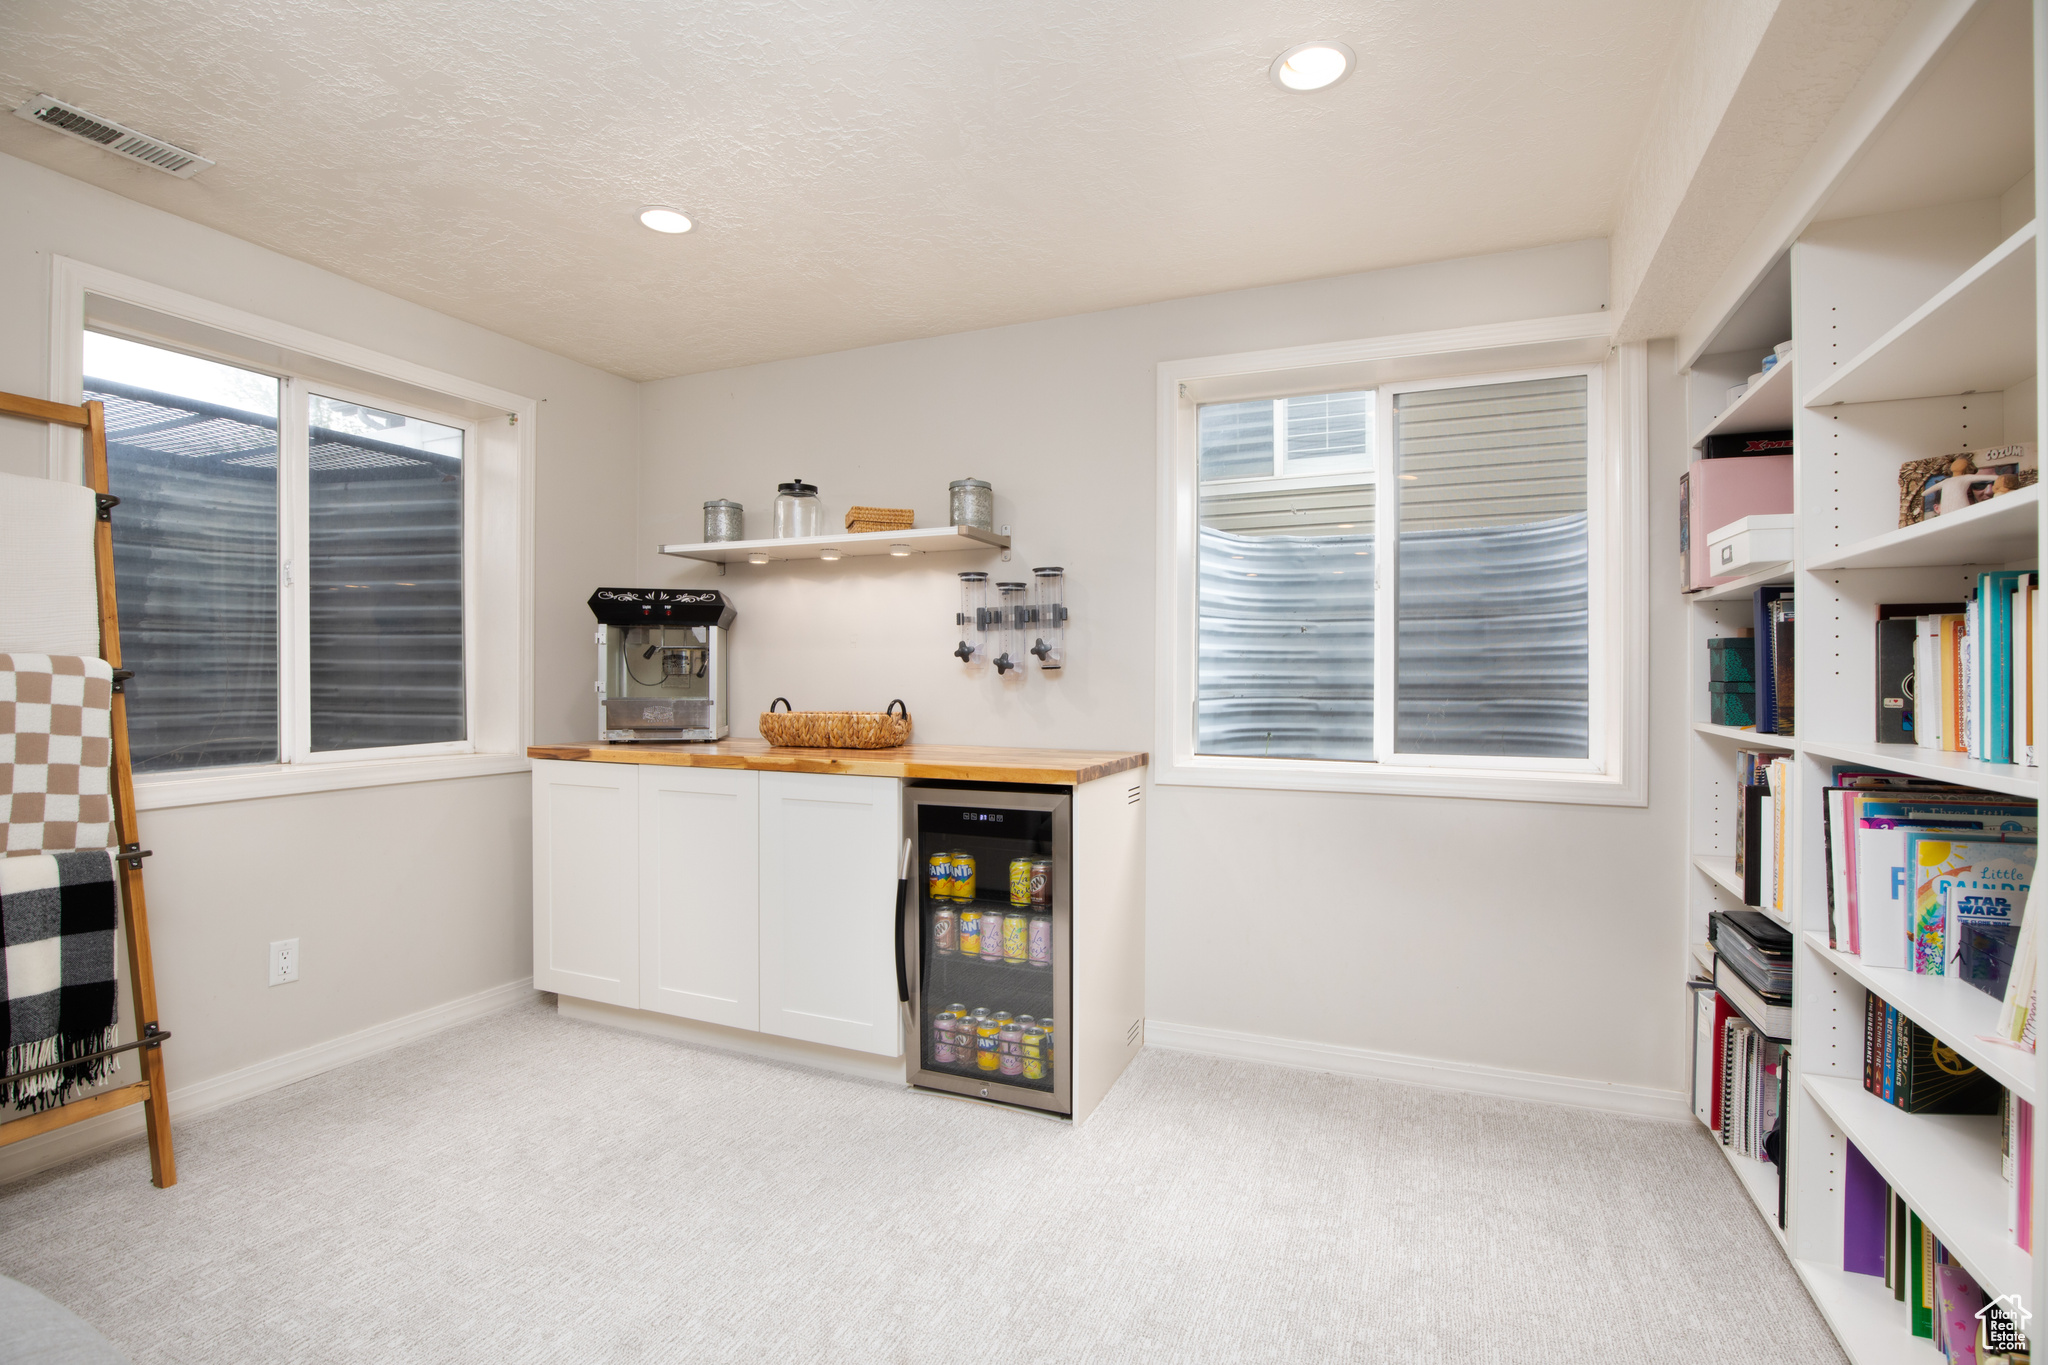 Interior space with plenty of natural light, light colored carpet, white cabinetry, and beverage cooler